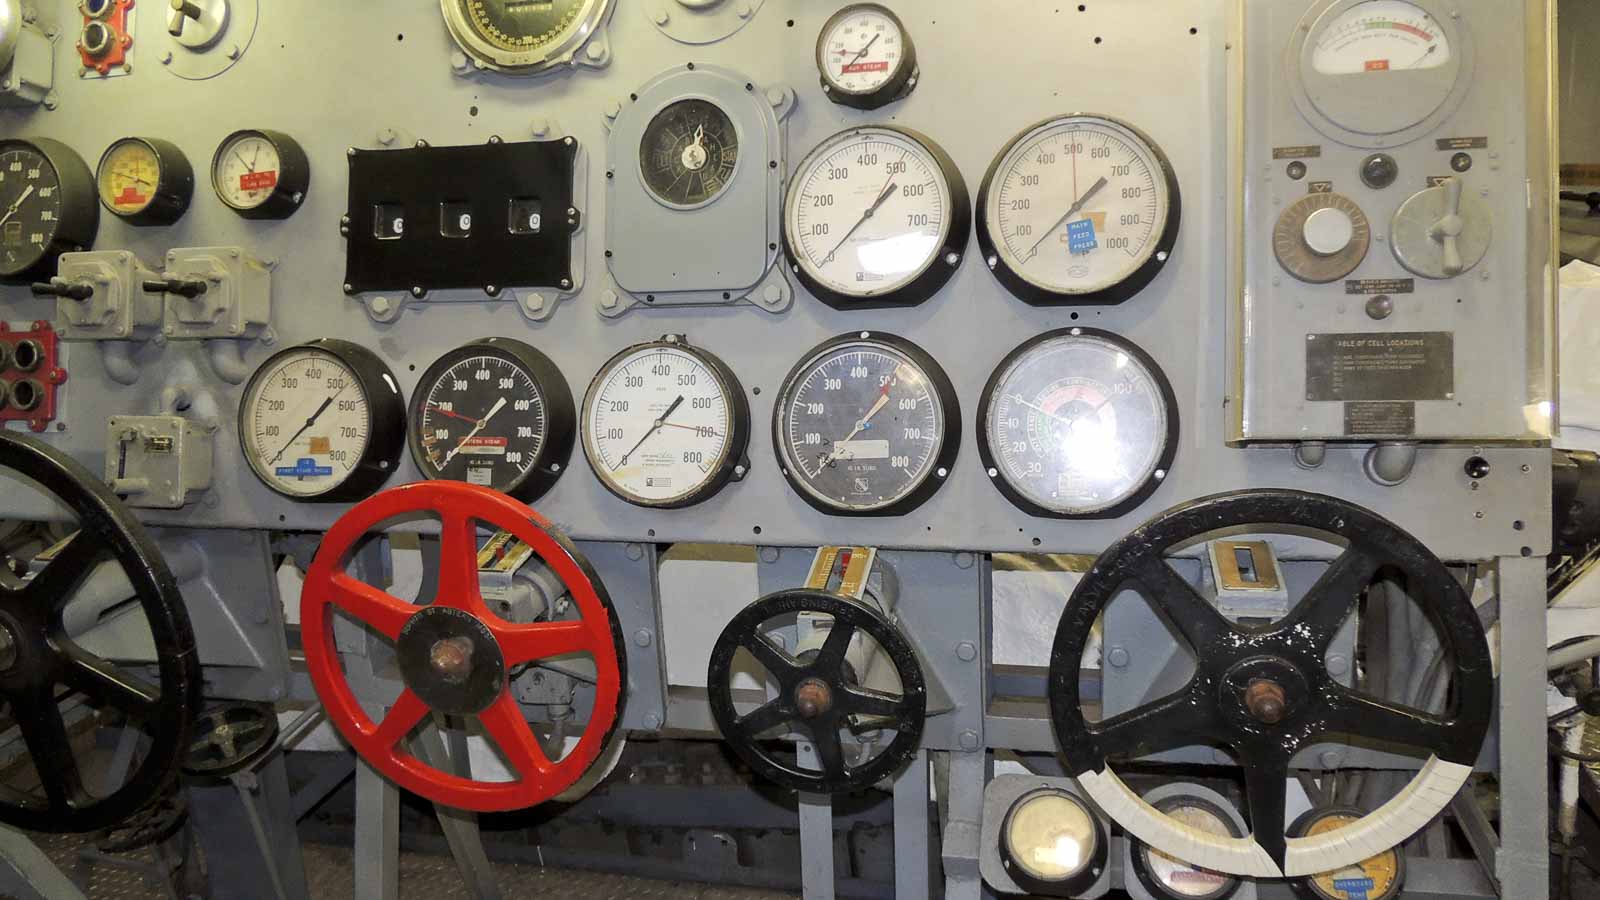 Reading Meters In Marine Ship - Patriots Point Foundation